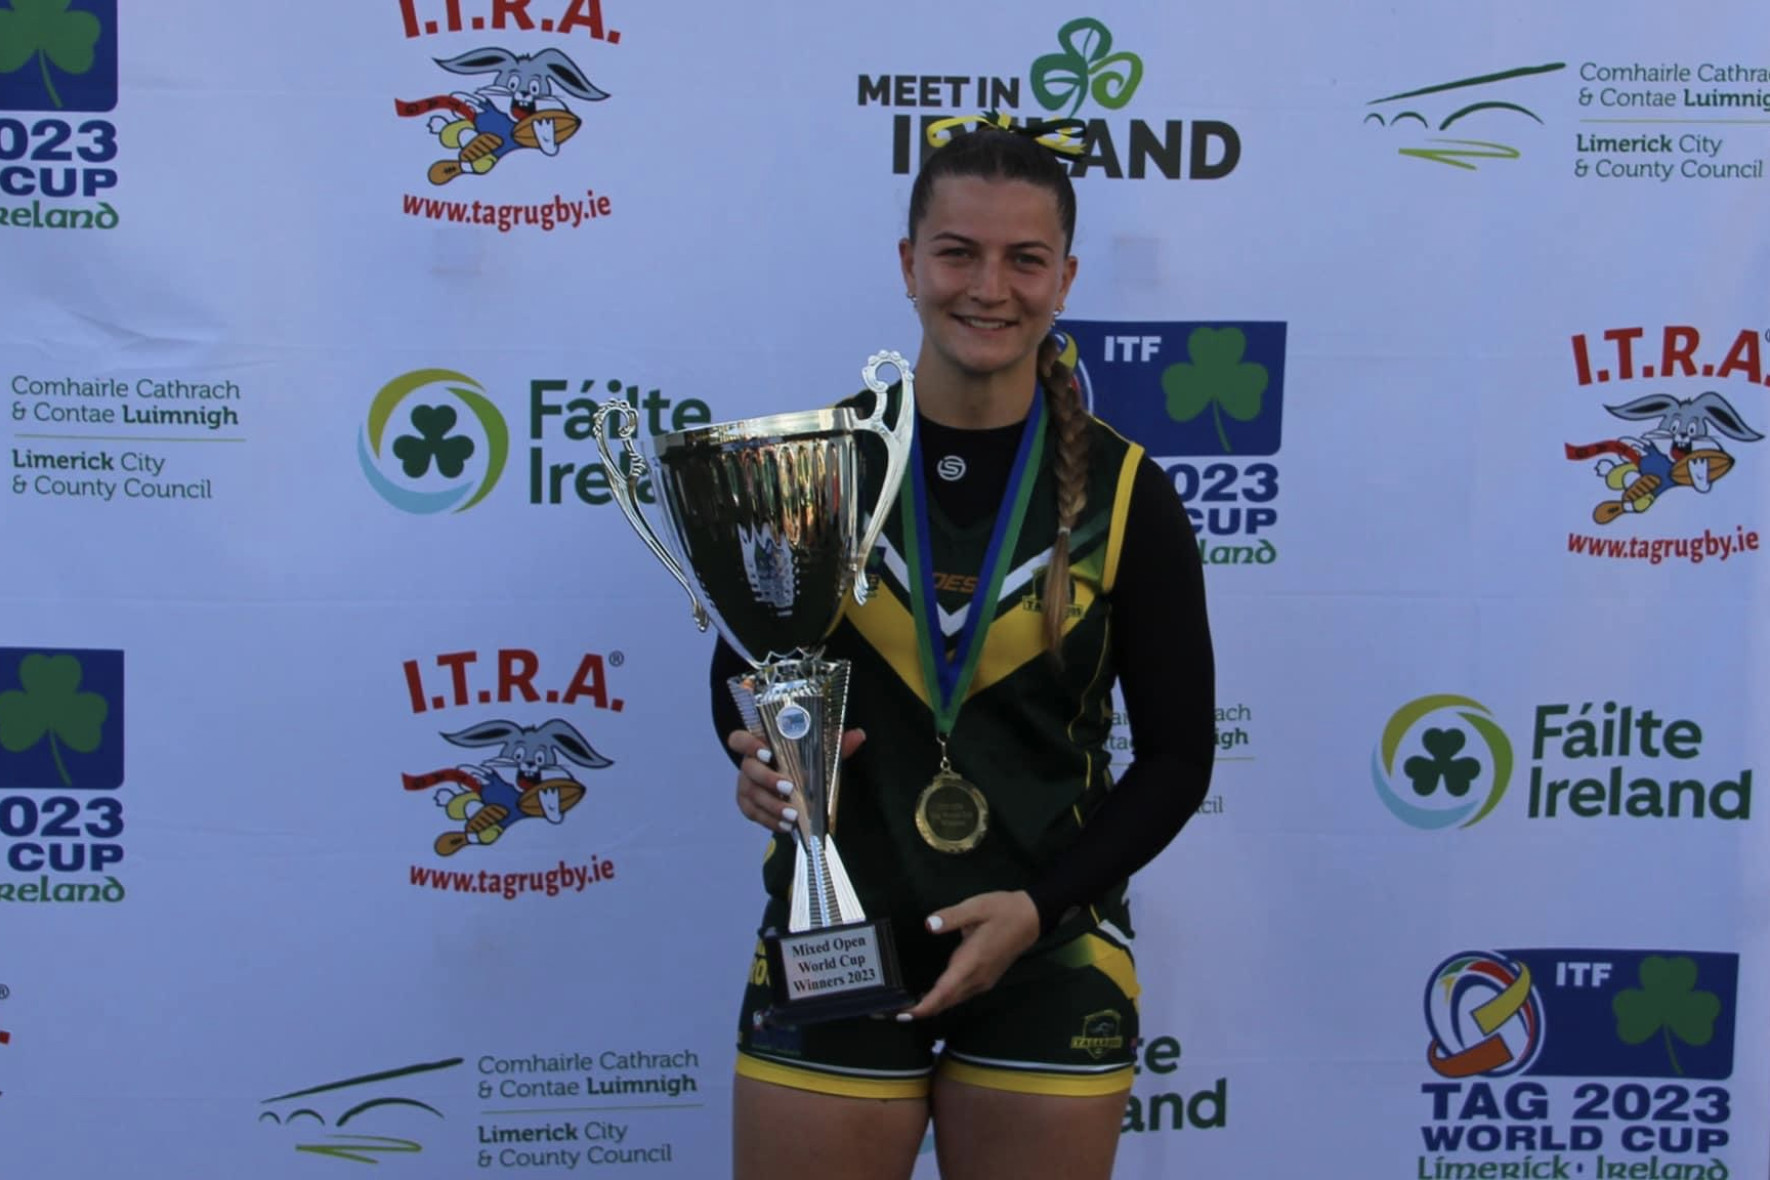 Wamuran resident Rachael Harper savours Australia’s World Cup win in the Open Mixed division at the Tag World Cup in Ireland.